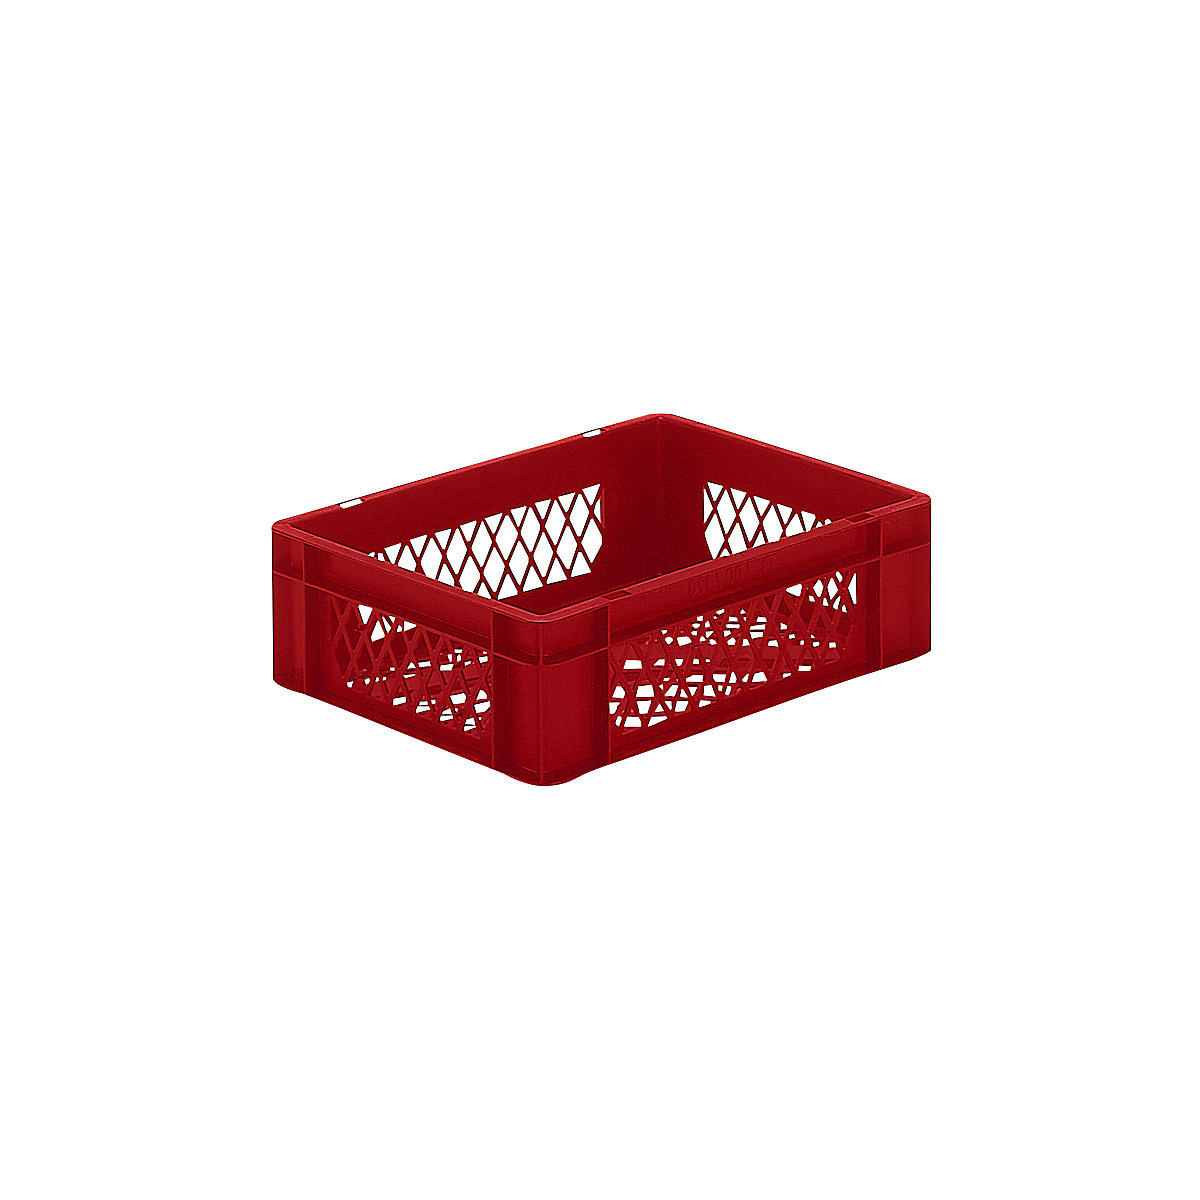 Euro stacking container, perforated walls and base, LxWxH 400 x 300 x 120 mm, red, pack of 5-6